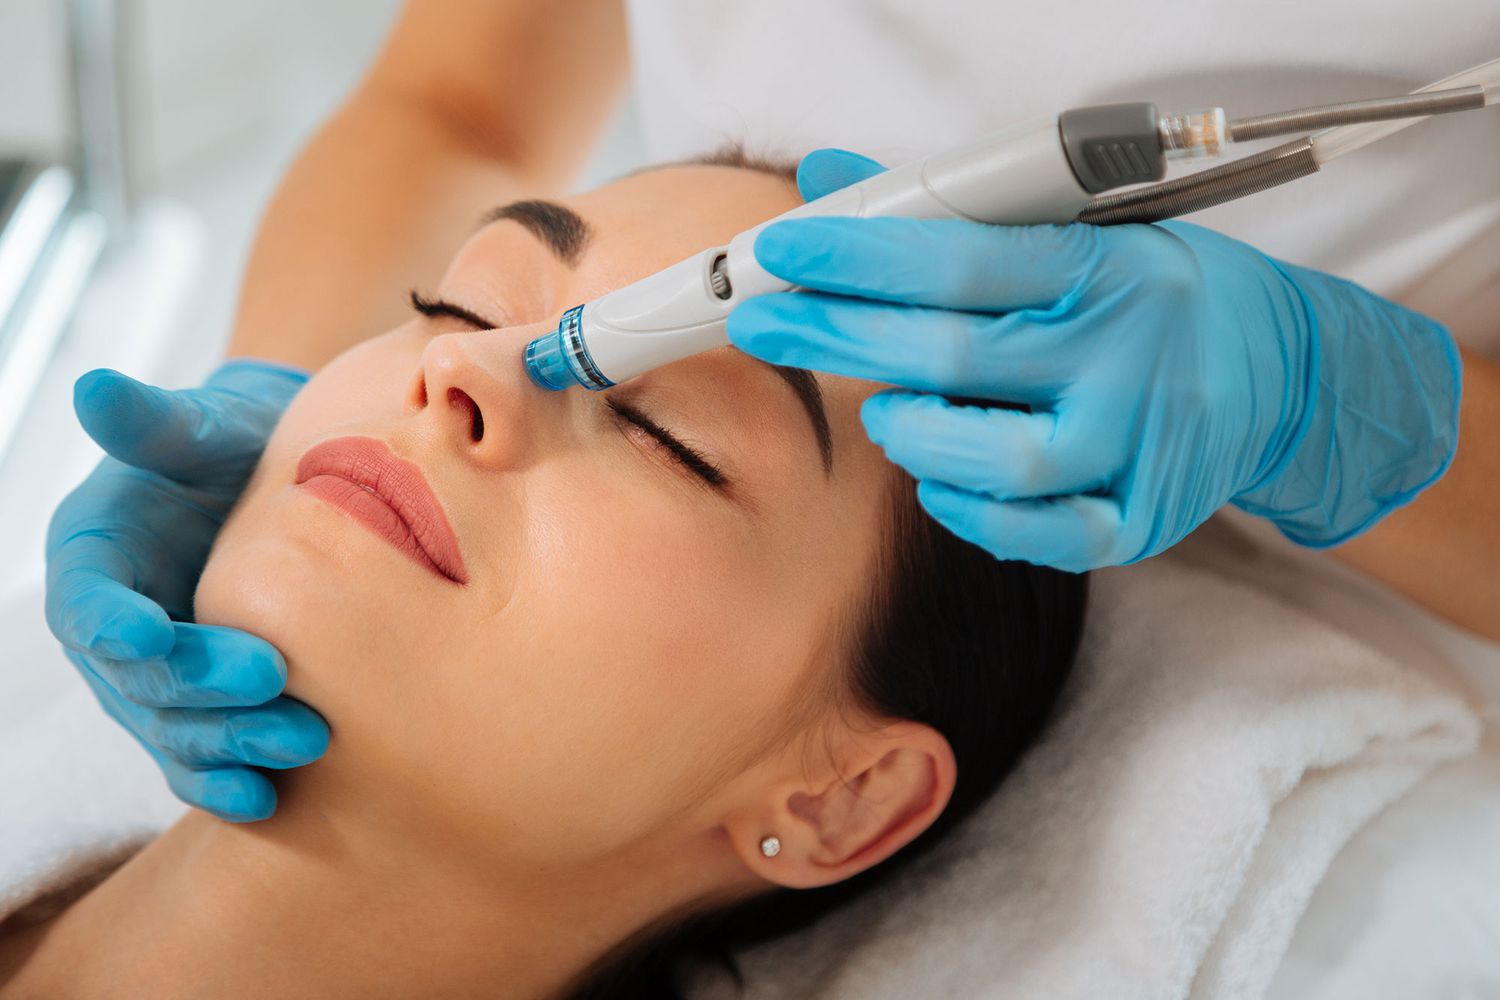 Experience the best Hydrafacial in San Diego at Prophecy Med Spa. Achieve radiant, hydrated skin with our personalized treatments. Book now for rejuvenated skin!